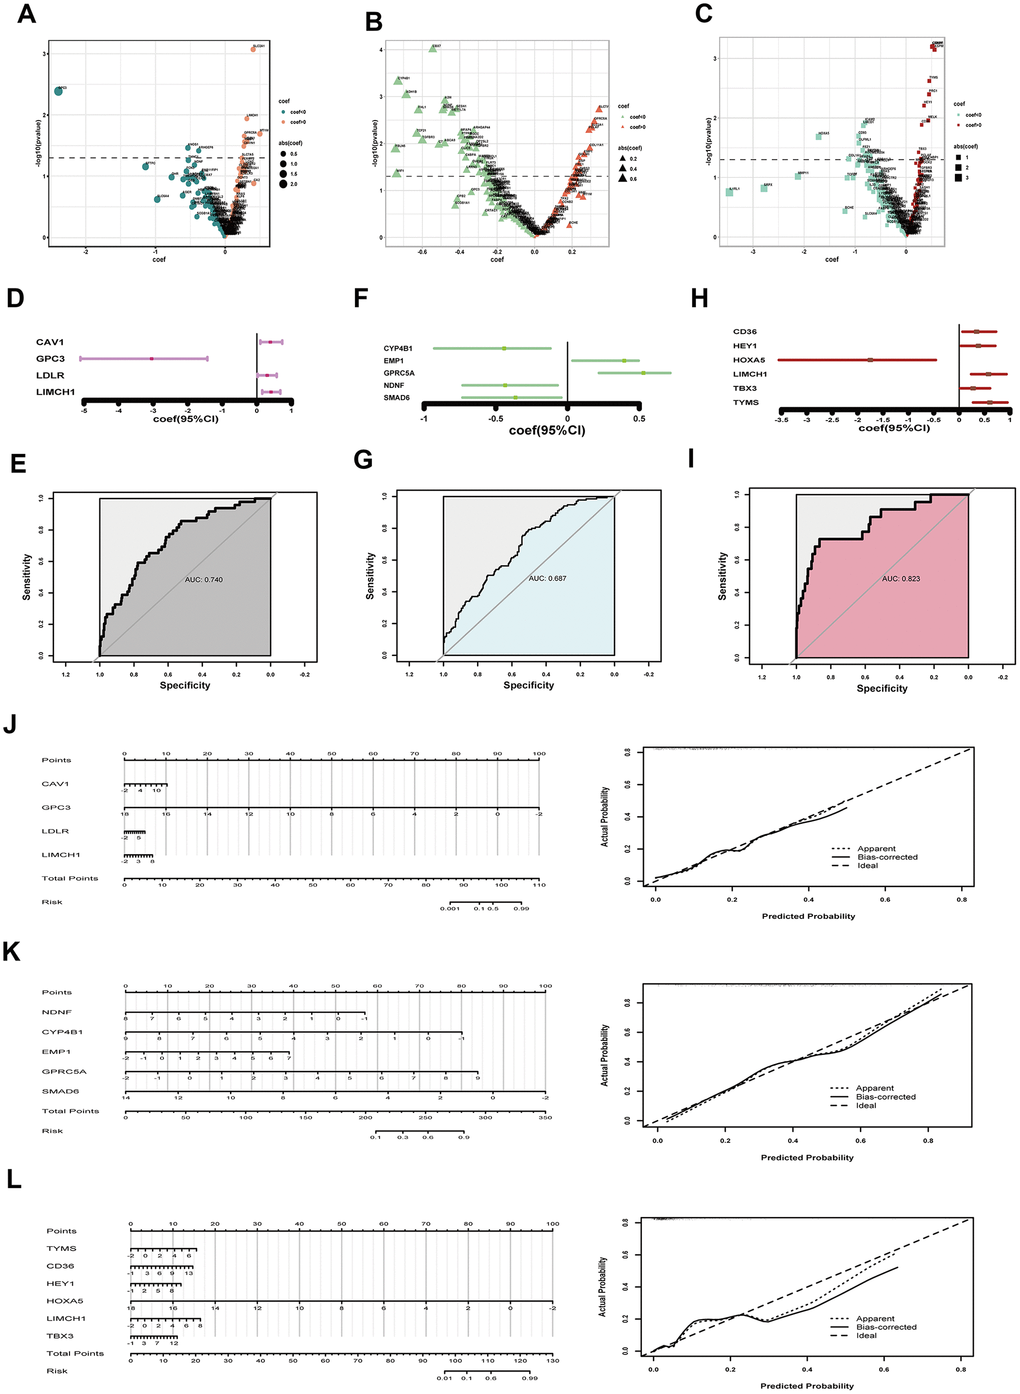 Assessing tumor size, lymph node invasion and distant metastasis. (A–C) coef and p value in univariate logistic regression analysis for tumor growth (A) lymph node invasion (B) and distant metastasis (C) respectively; (D) coef and 95% CI derived from the optimized model for tumor size; (E) ROC curve to show predictive potential of T-related model; (F) coef and 95% CI of the improved model for lymph node invasion; (G) ROC curve to exhibiting predictive efficacy of N parameter; (H) coef and 95% CI of the optimized model for distant metastasis; (I) ROC curve to exhibiting efficacy of M prediction; (J) Nomograph to assess T risk probability and corresponding calibration curve; (K) Nomograph to estimate lymph node invasion hazard and examination of efficacy; (L) Nomograph to assess distant metastasis risk and calibration curve showing model’s predictive potential. coef, coefficient; DEGs, differentially expressed genes; CI, confidence interval; ROC, receiver operating characteristic.